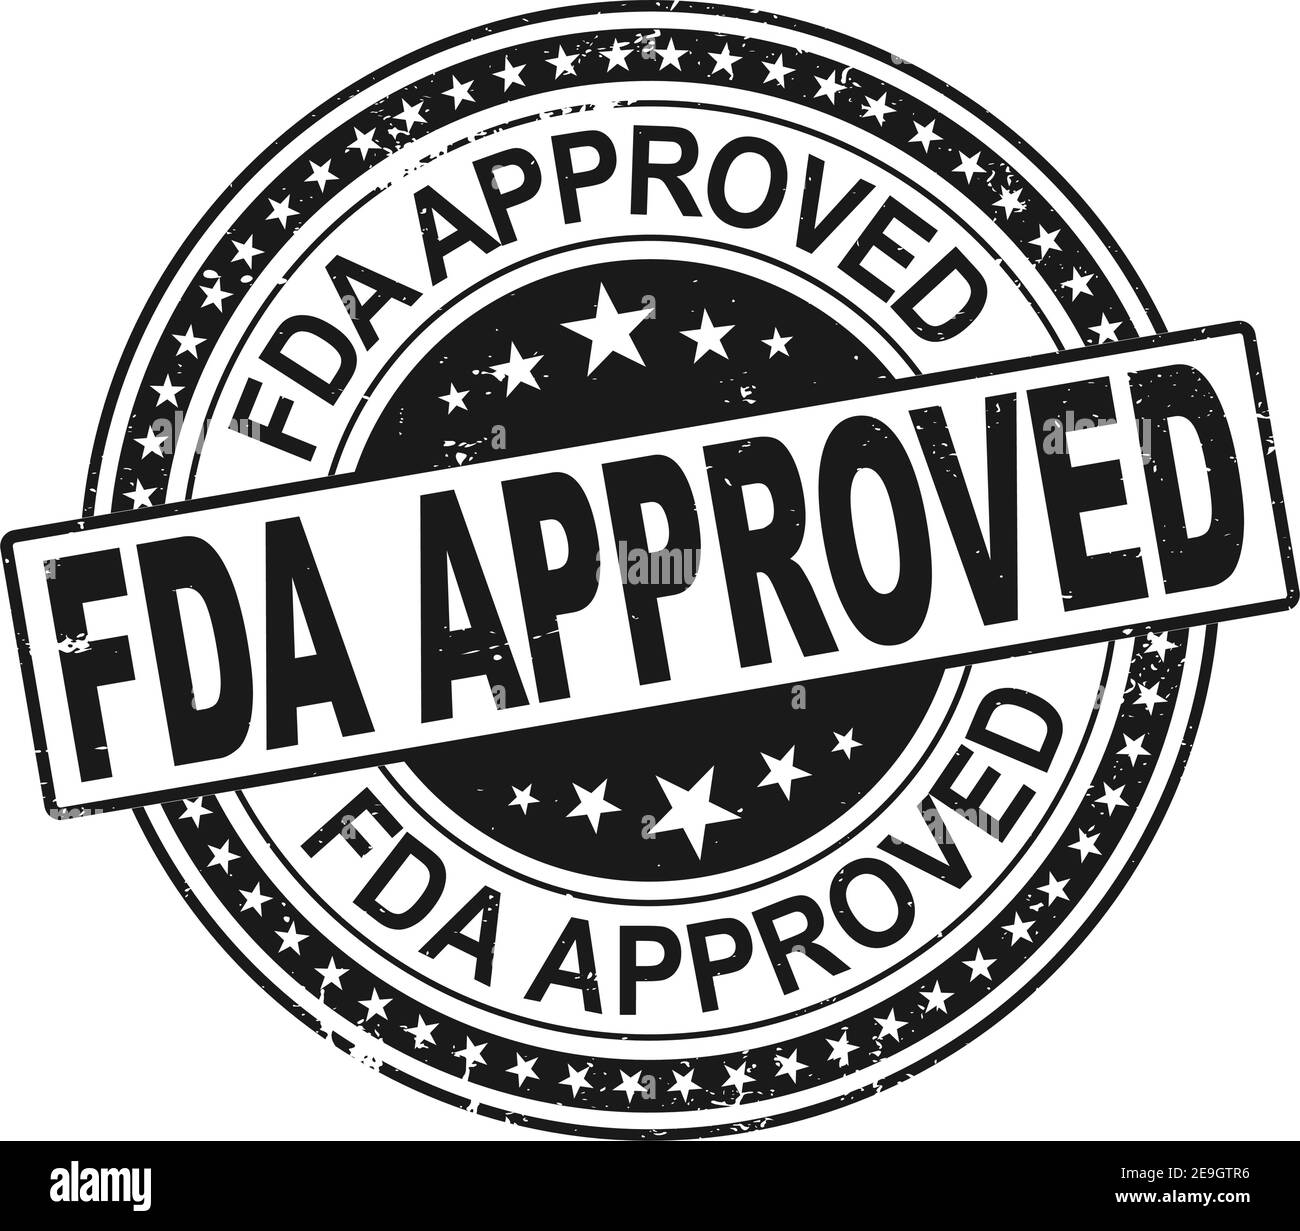 FDA Approved Vector black Stamp. Grunge red rubber stamp or badge with text FDA Approved . Stock Vector